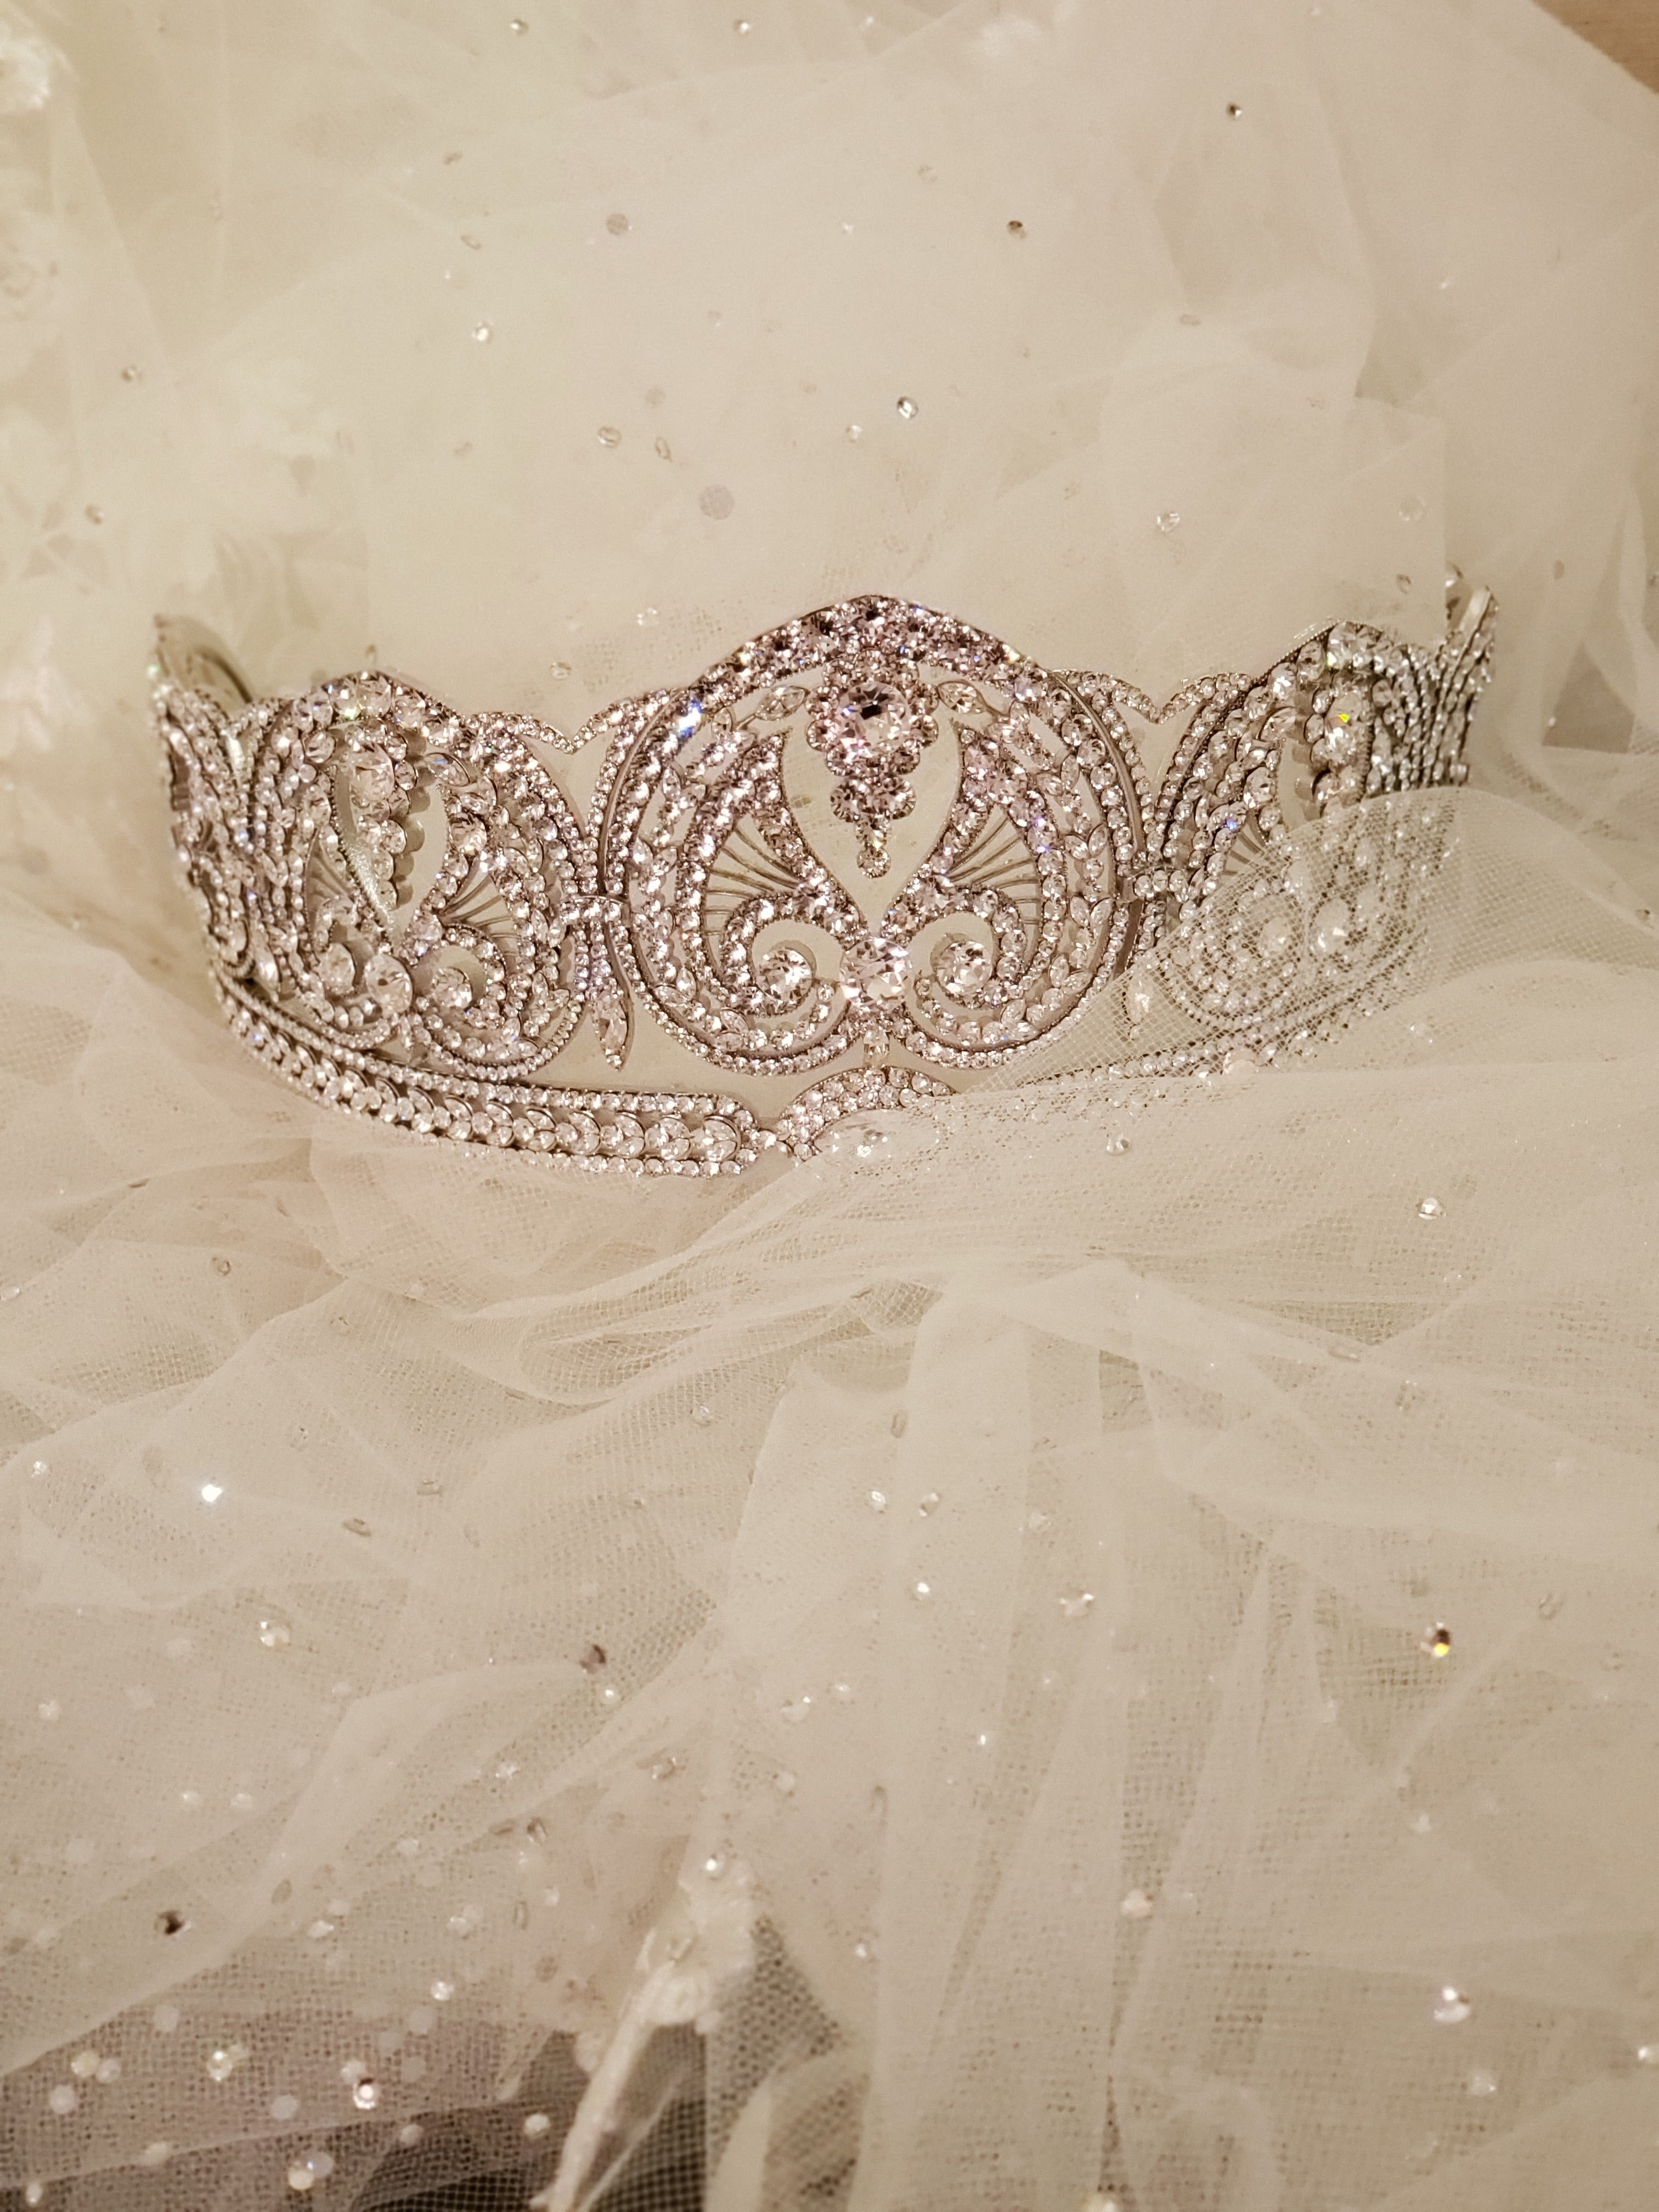  Marie Antoinette-inspired bridal style! This shoot features glam, lavish decor and bridal styles ideas, like this Swarovski crystal bridal tiara from Bridal Styles Boutique.  Photography by Artvesta Studio. 